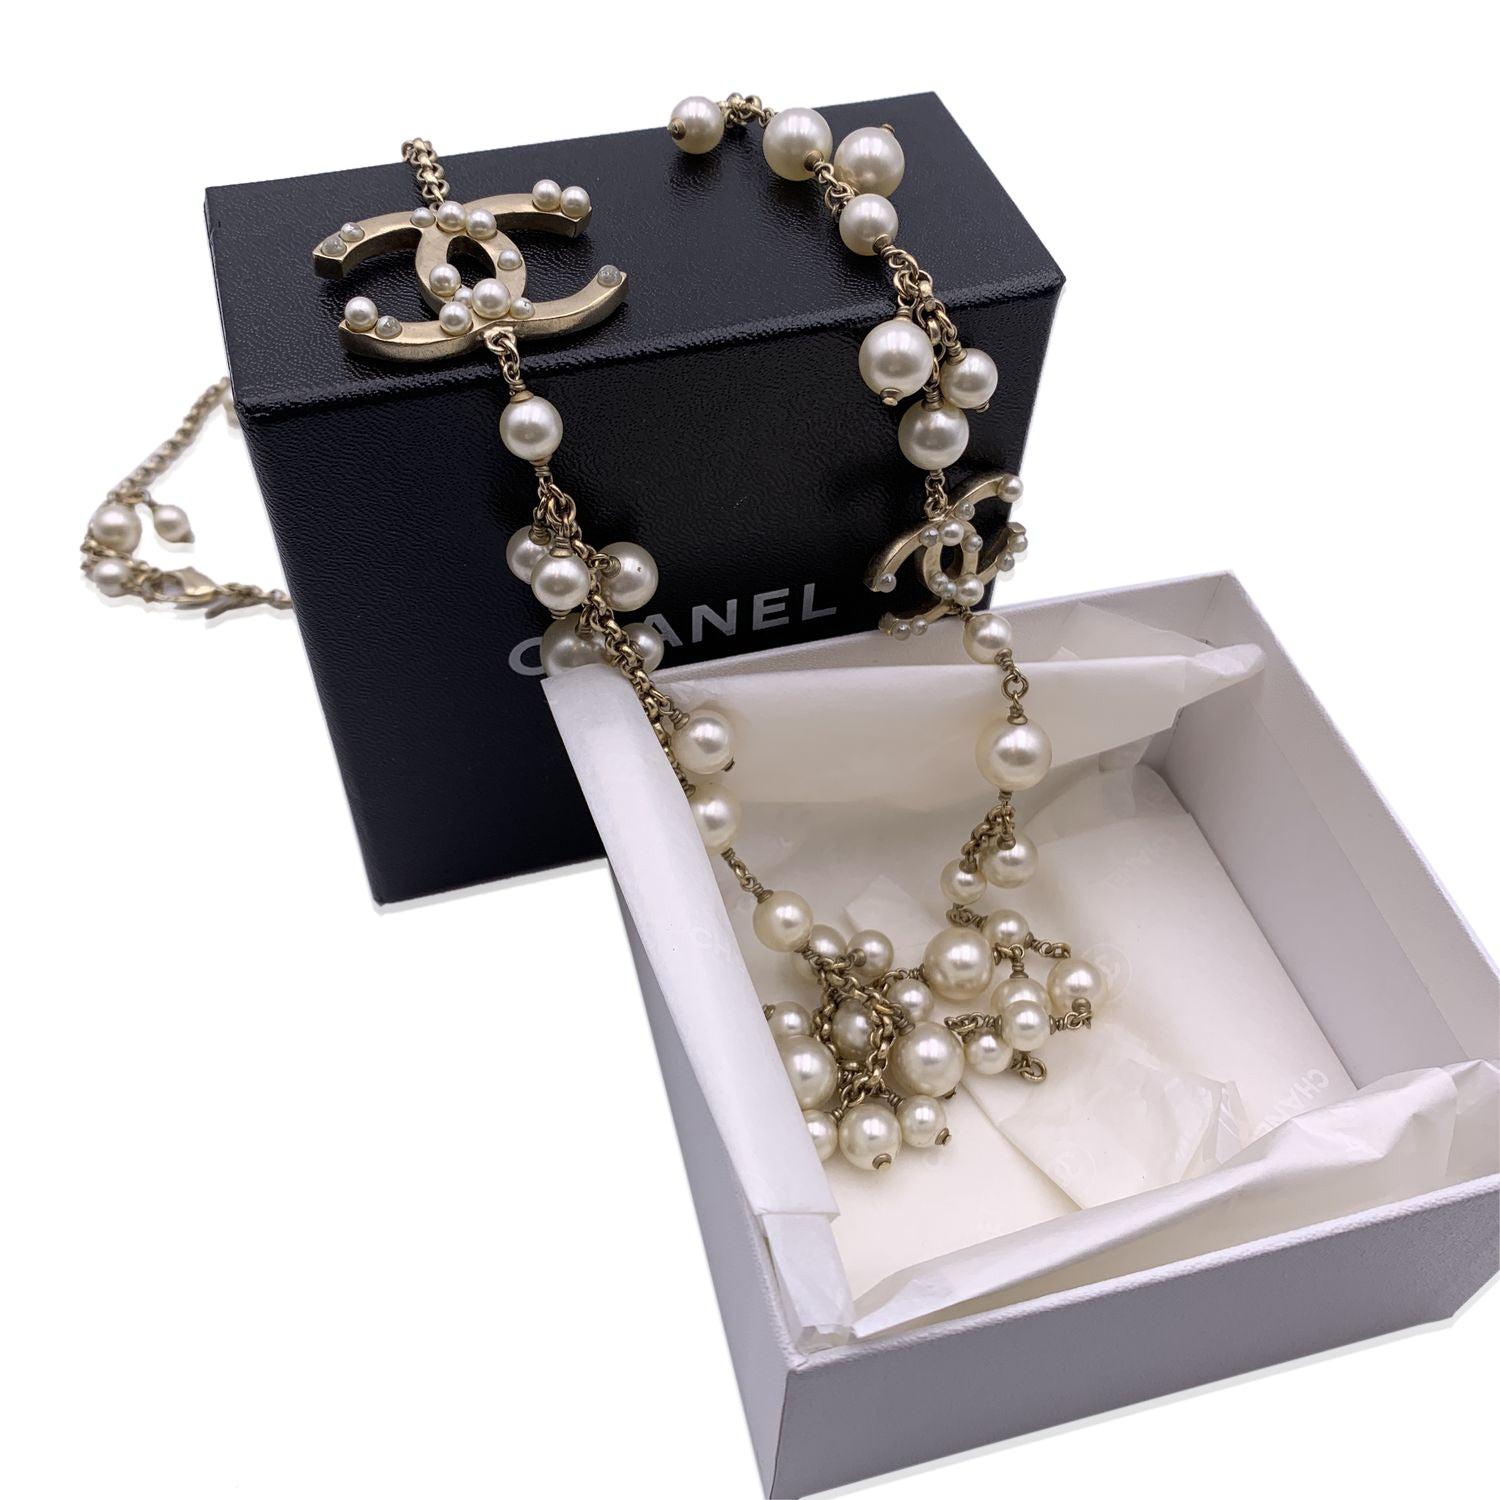 Long light old metal chain necklace by Chanel. It features artificial pearl beads in different sizes and CC logos embellished with small faux pearls. Lobster closure. Can be worn also doubled. 'CHANEL - A13 CC S- Made in France oval tab on the